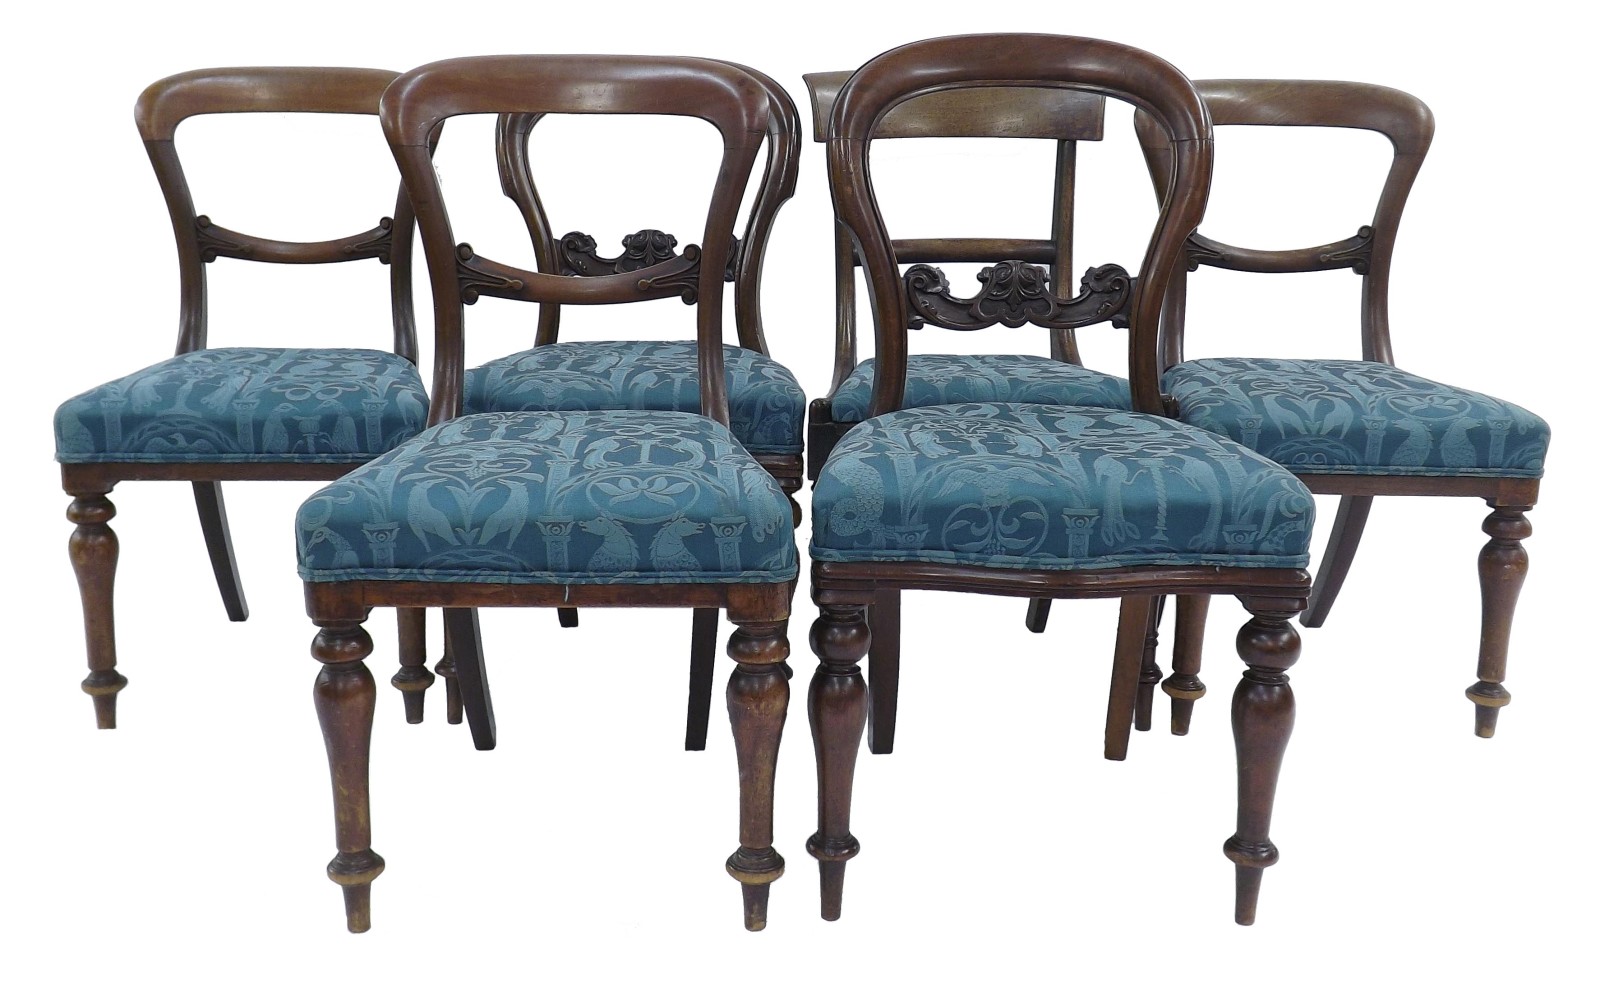 Harlequin set of five 19th century mahogany balloon back dining chairs, with stuffover seats and